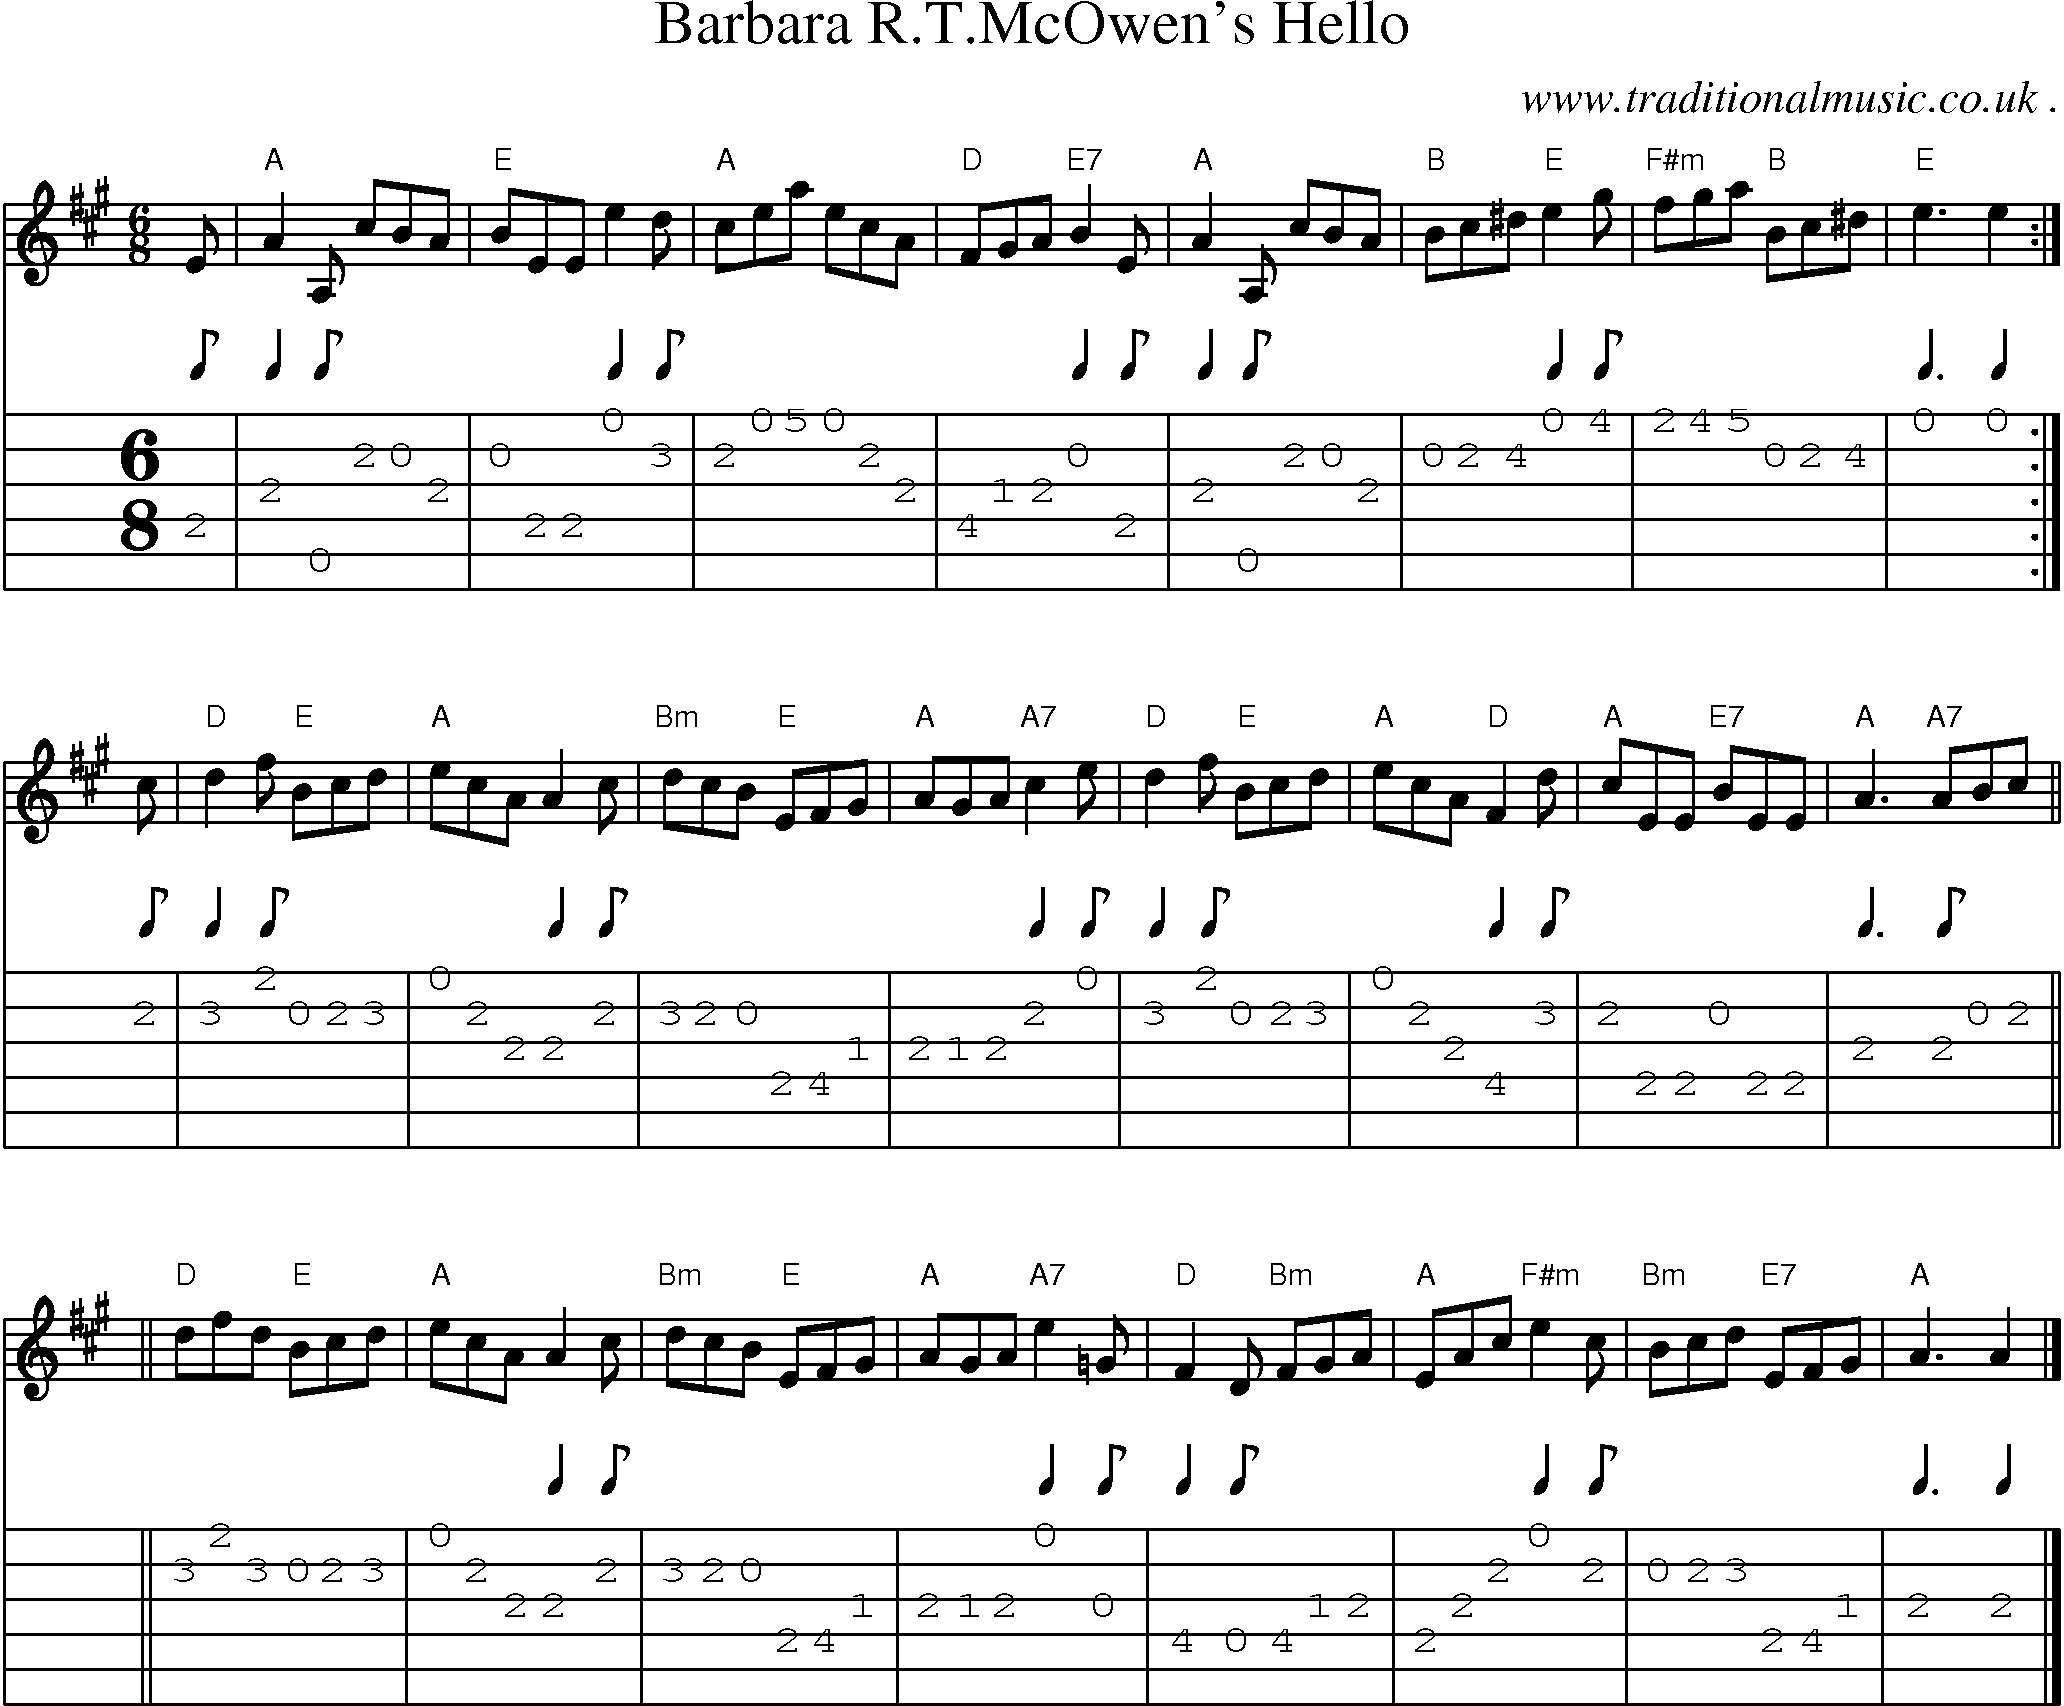 Sheet-music  score, Chords and Guitar Tabs for Barbara Rtmcowens Hello